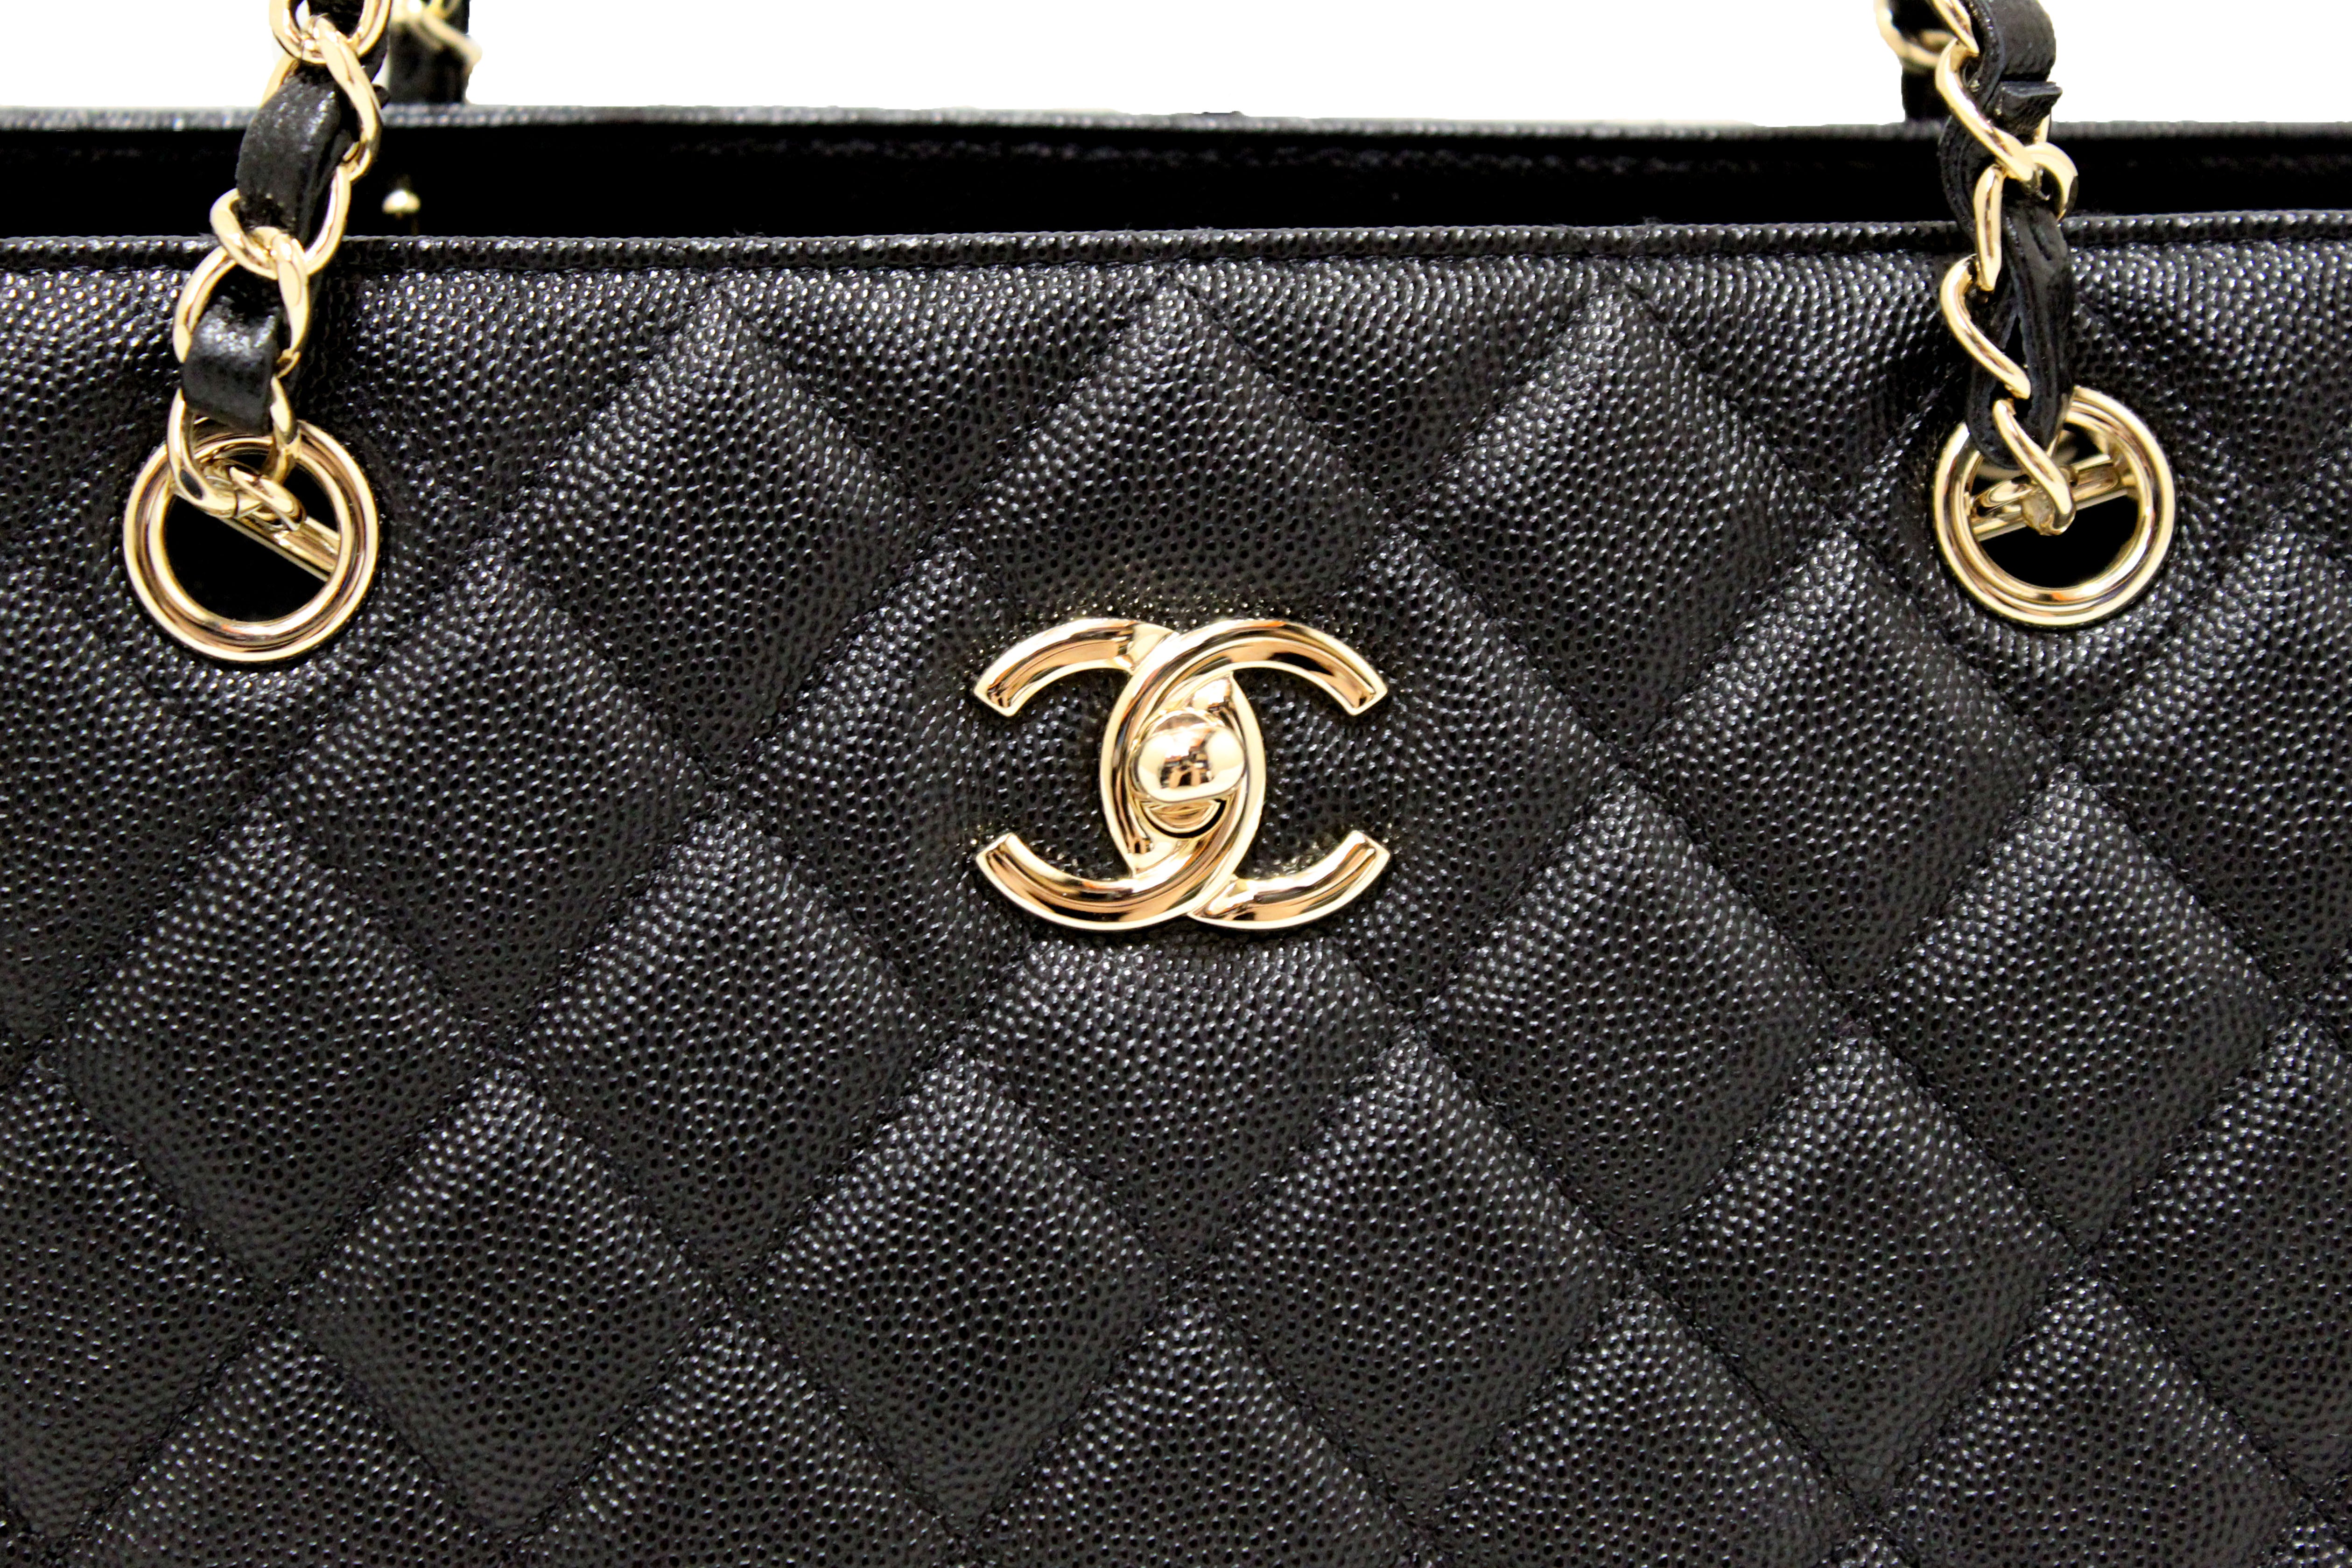 Authentic Chanel Black Quilted Caviar Leather Large Shopping Tote Bag